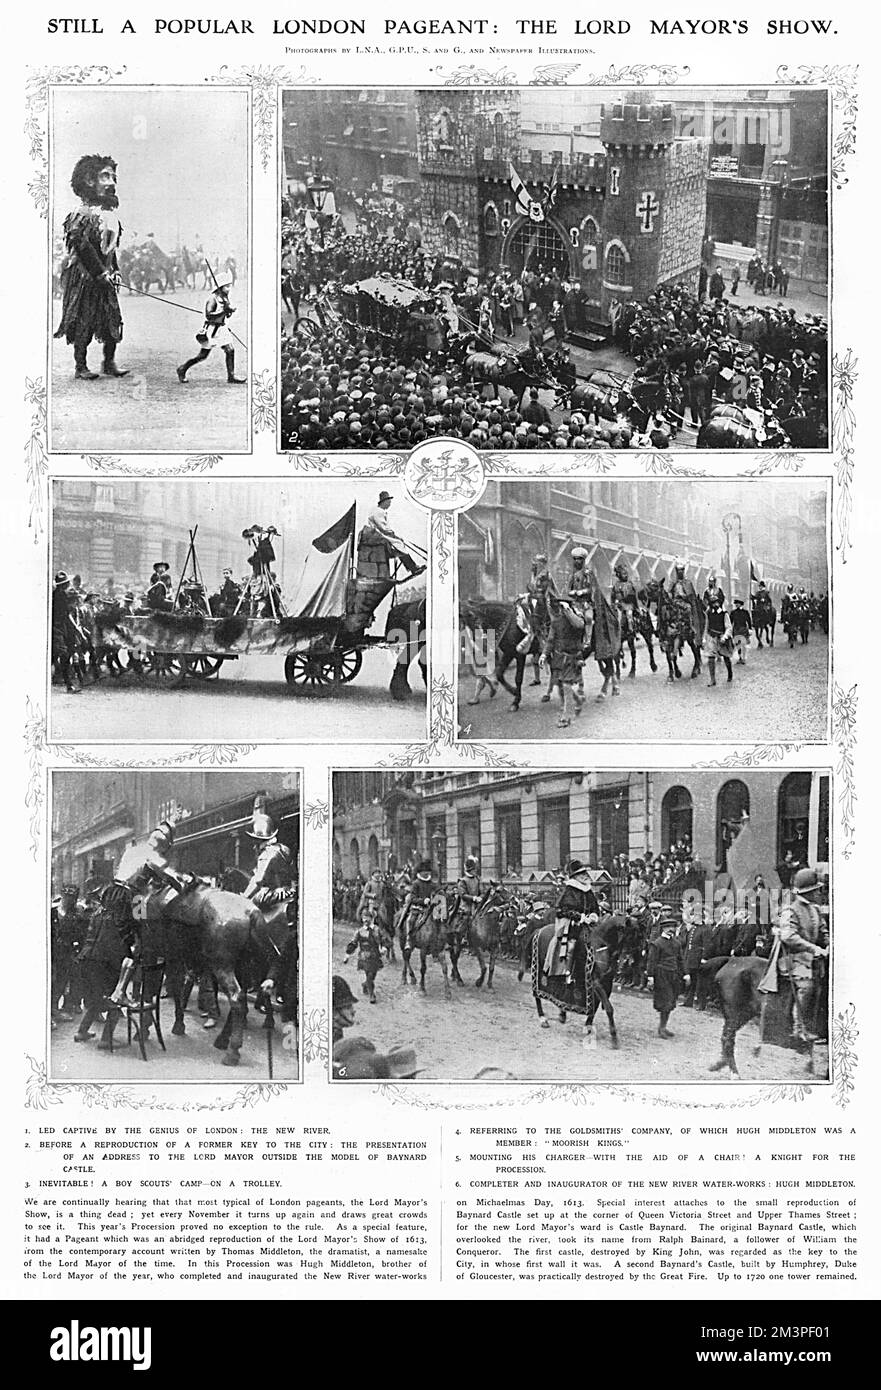 The 1913 Lord Mayor's Show was an abridged reproduction of the Lord Mayor's Show of 1613 from the contemporary account written by Thomas Middleton. Included in the parade were a giant being led by a child, a miniature model of Baynard castle and a boy scout camp on a trolley.     Date: 1913 Stock Photo